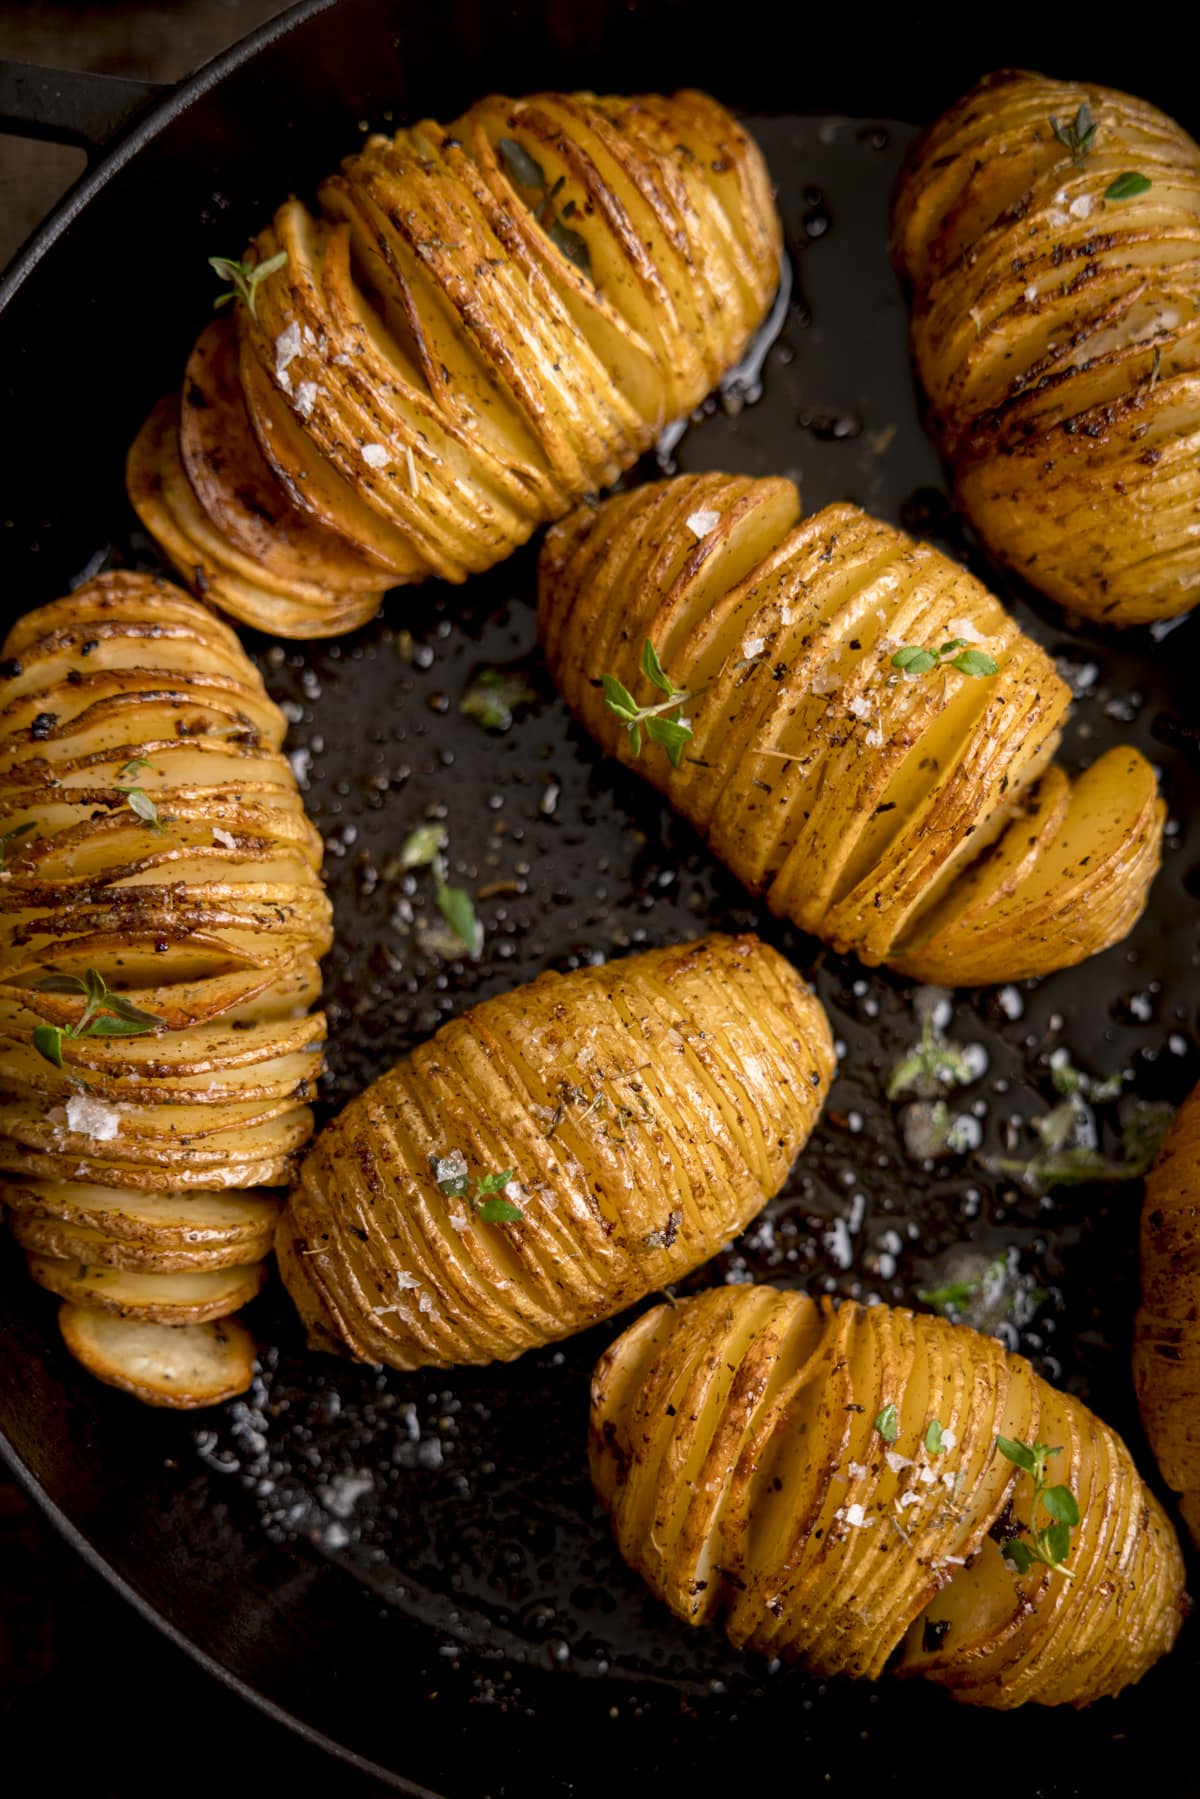 Top view of Hasselback potatoes in a dark cast iron skillet, garnished with fresh thyme leaves and Maldon salt